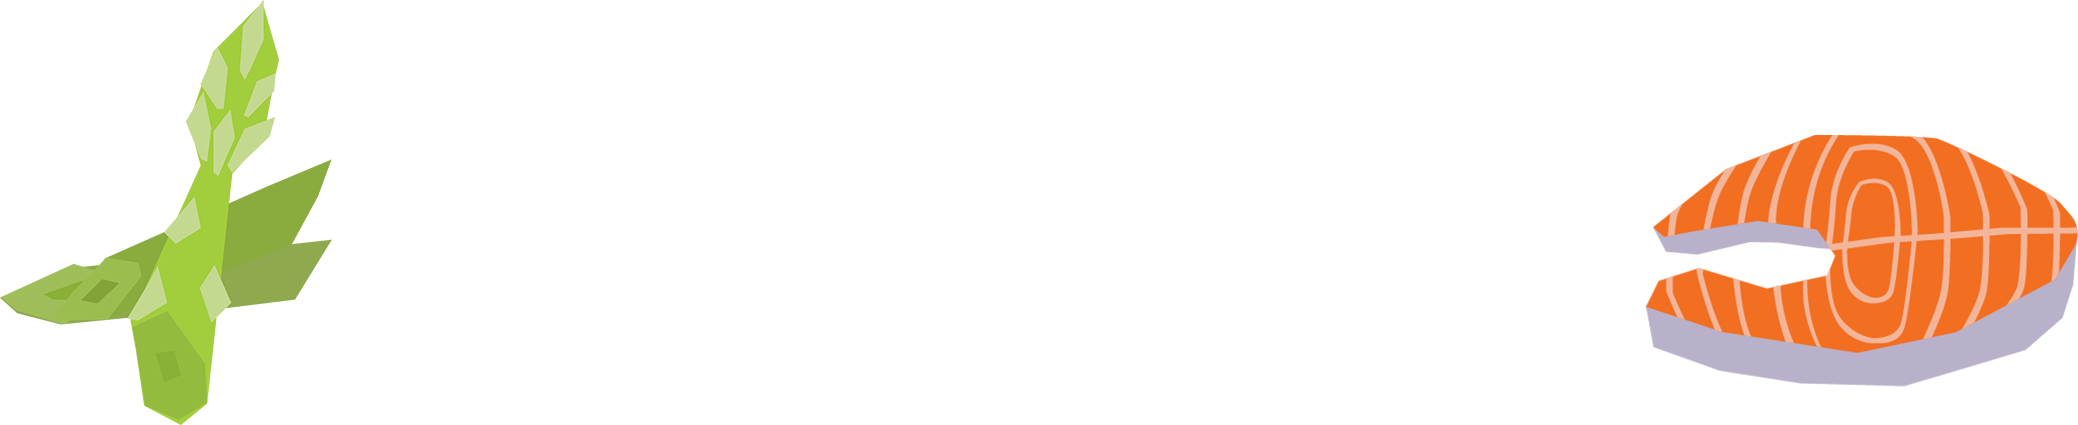 Sounds of Food